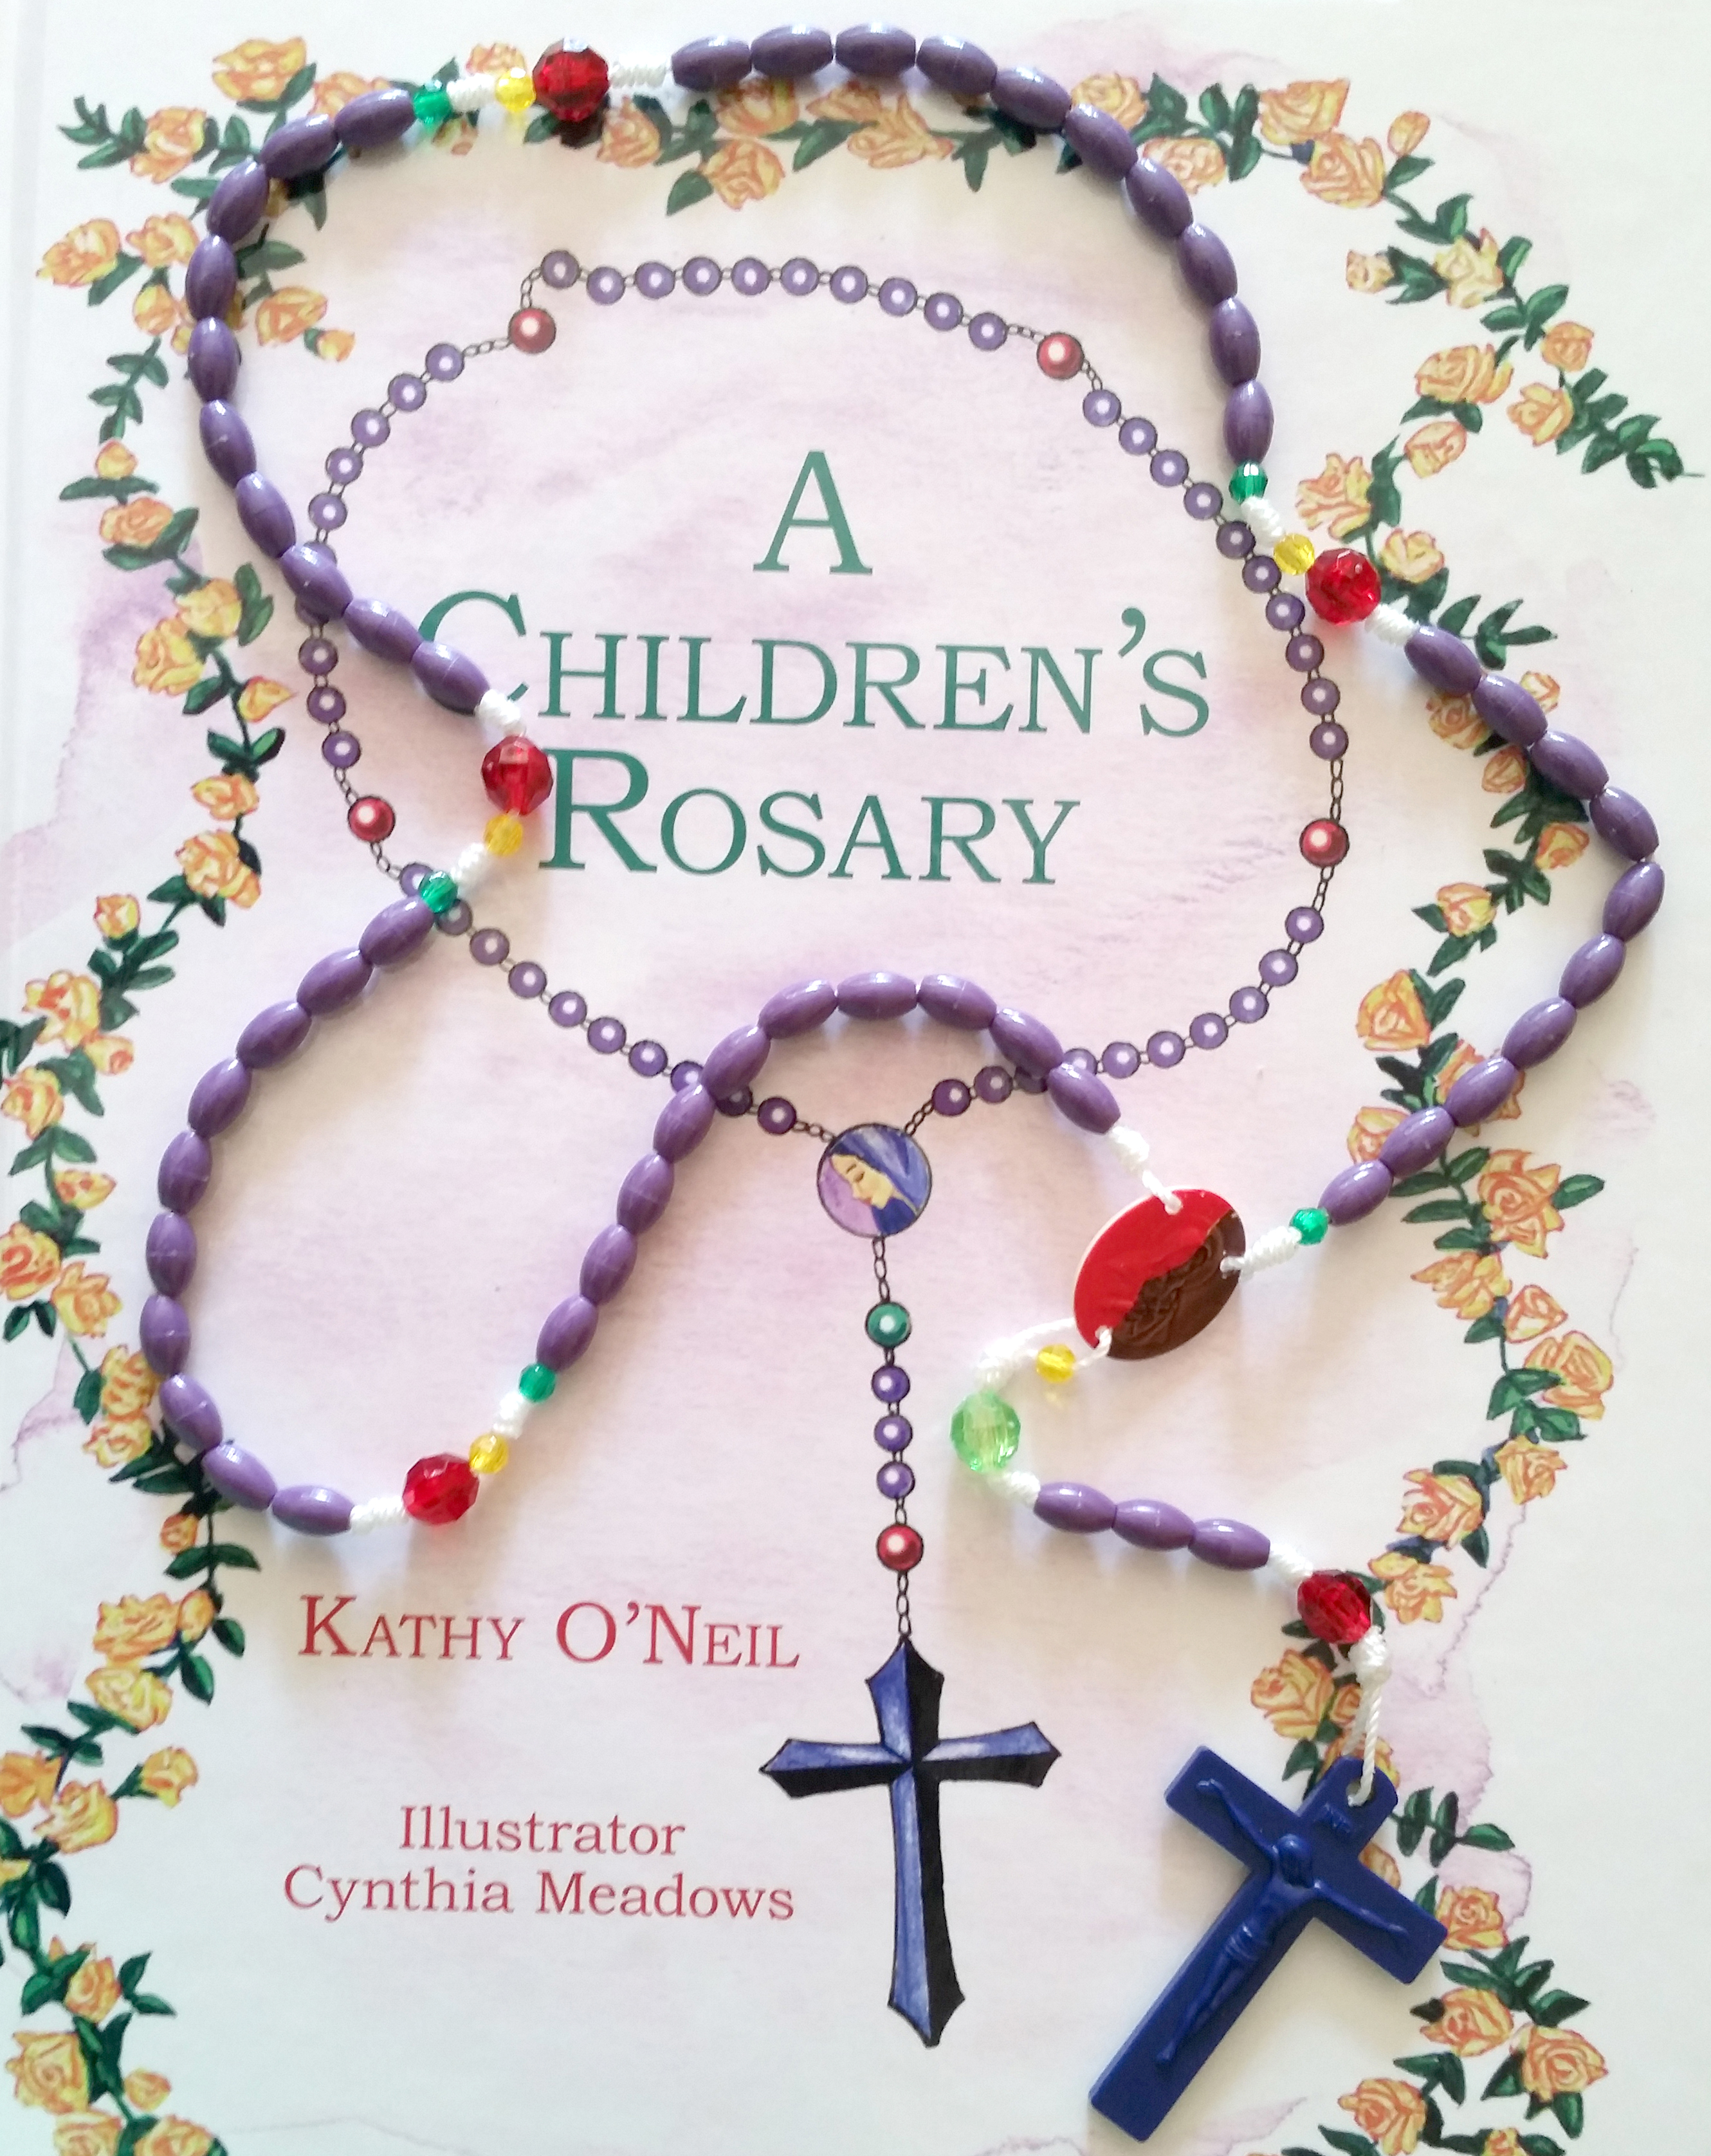 Kathy O'Neil | A Children's Rosary